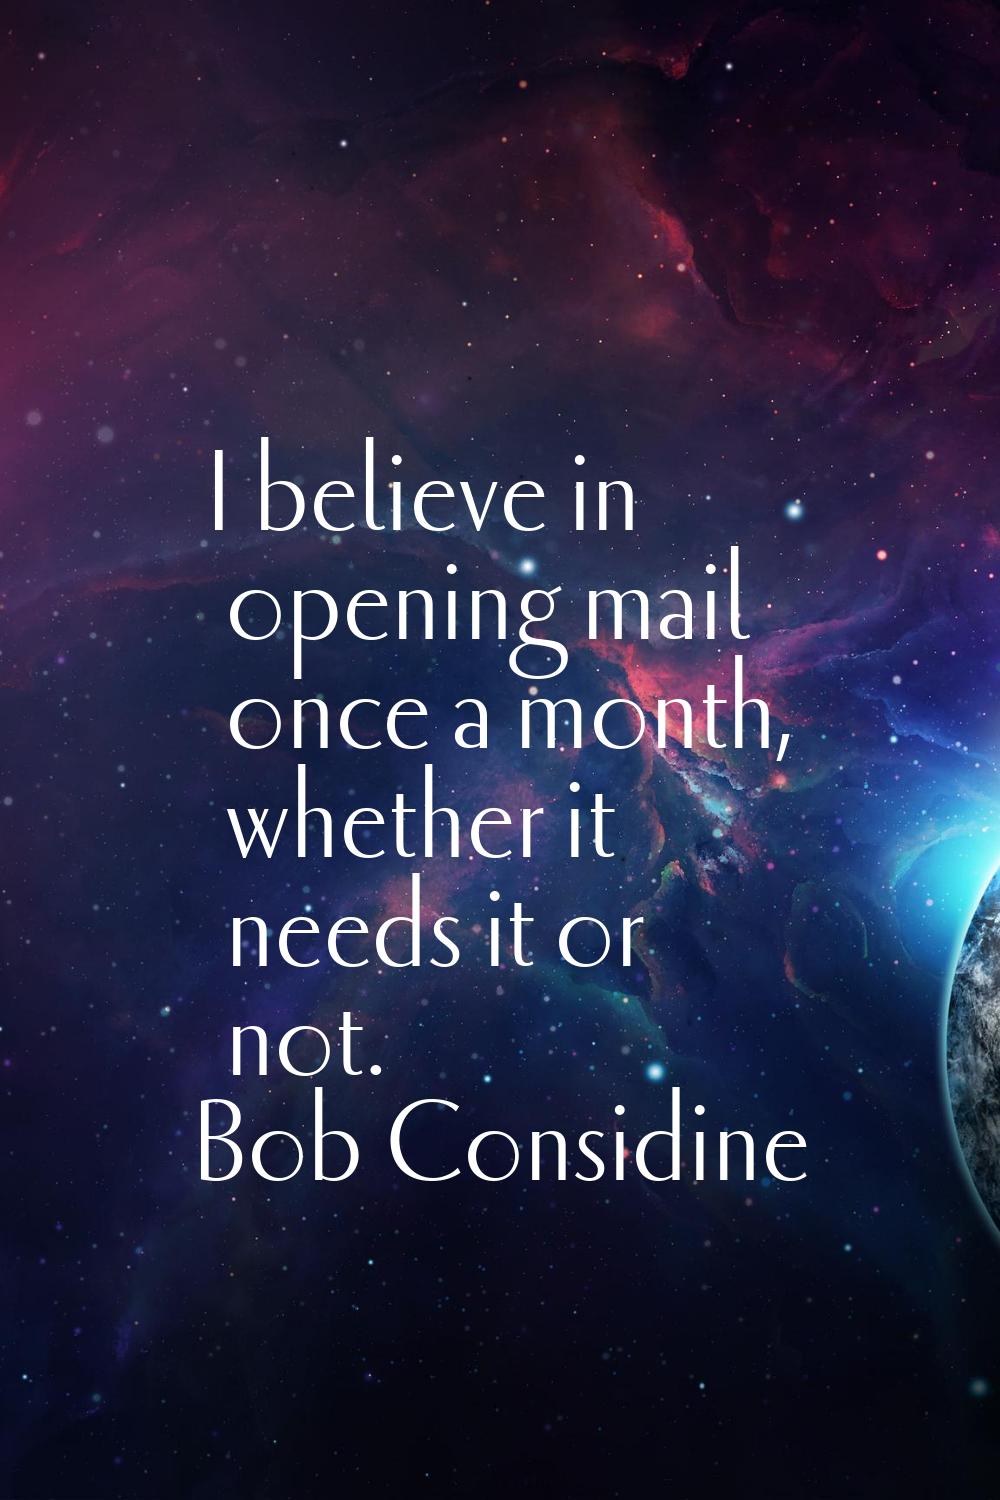 I believe in opening mail once a month, whether it needs it or not.